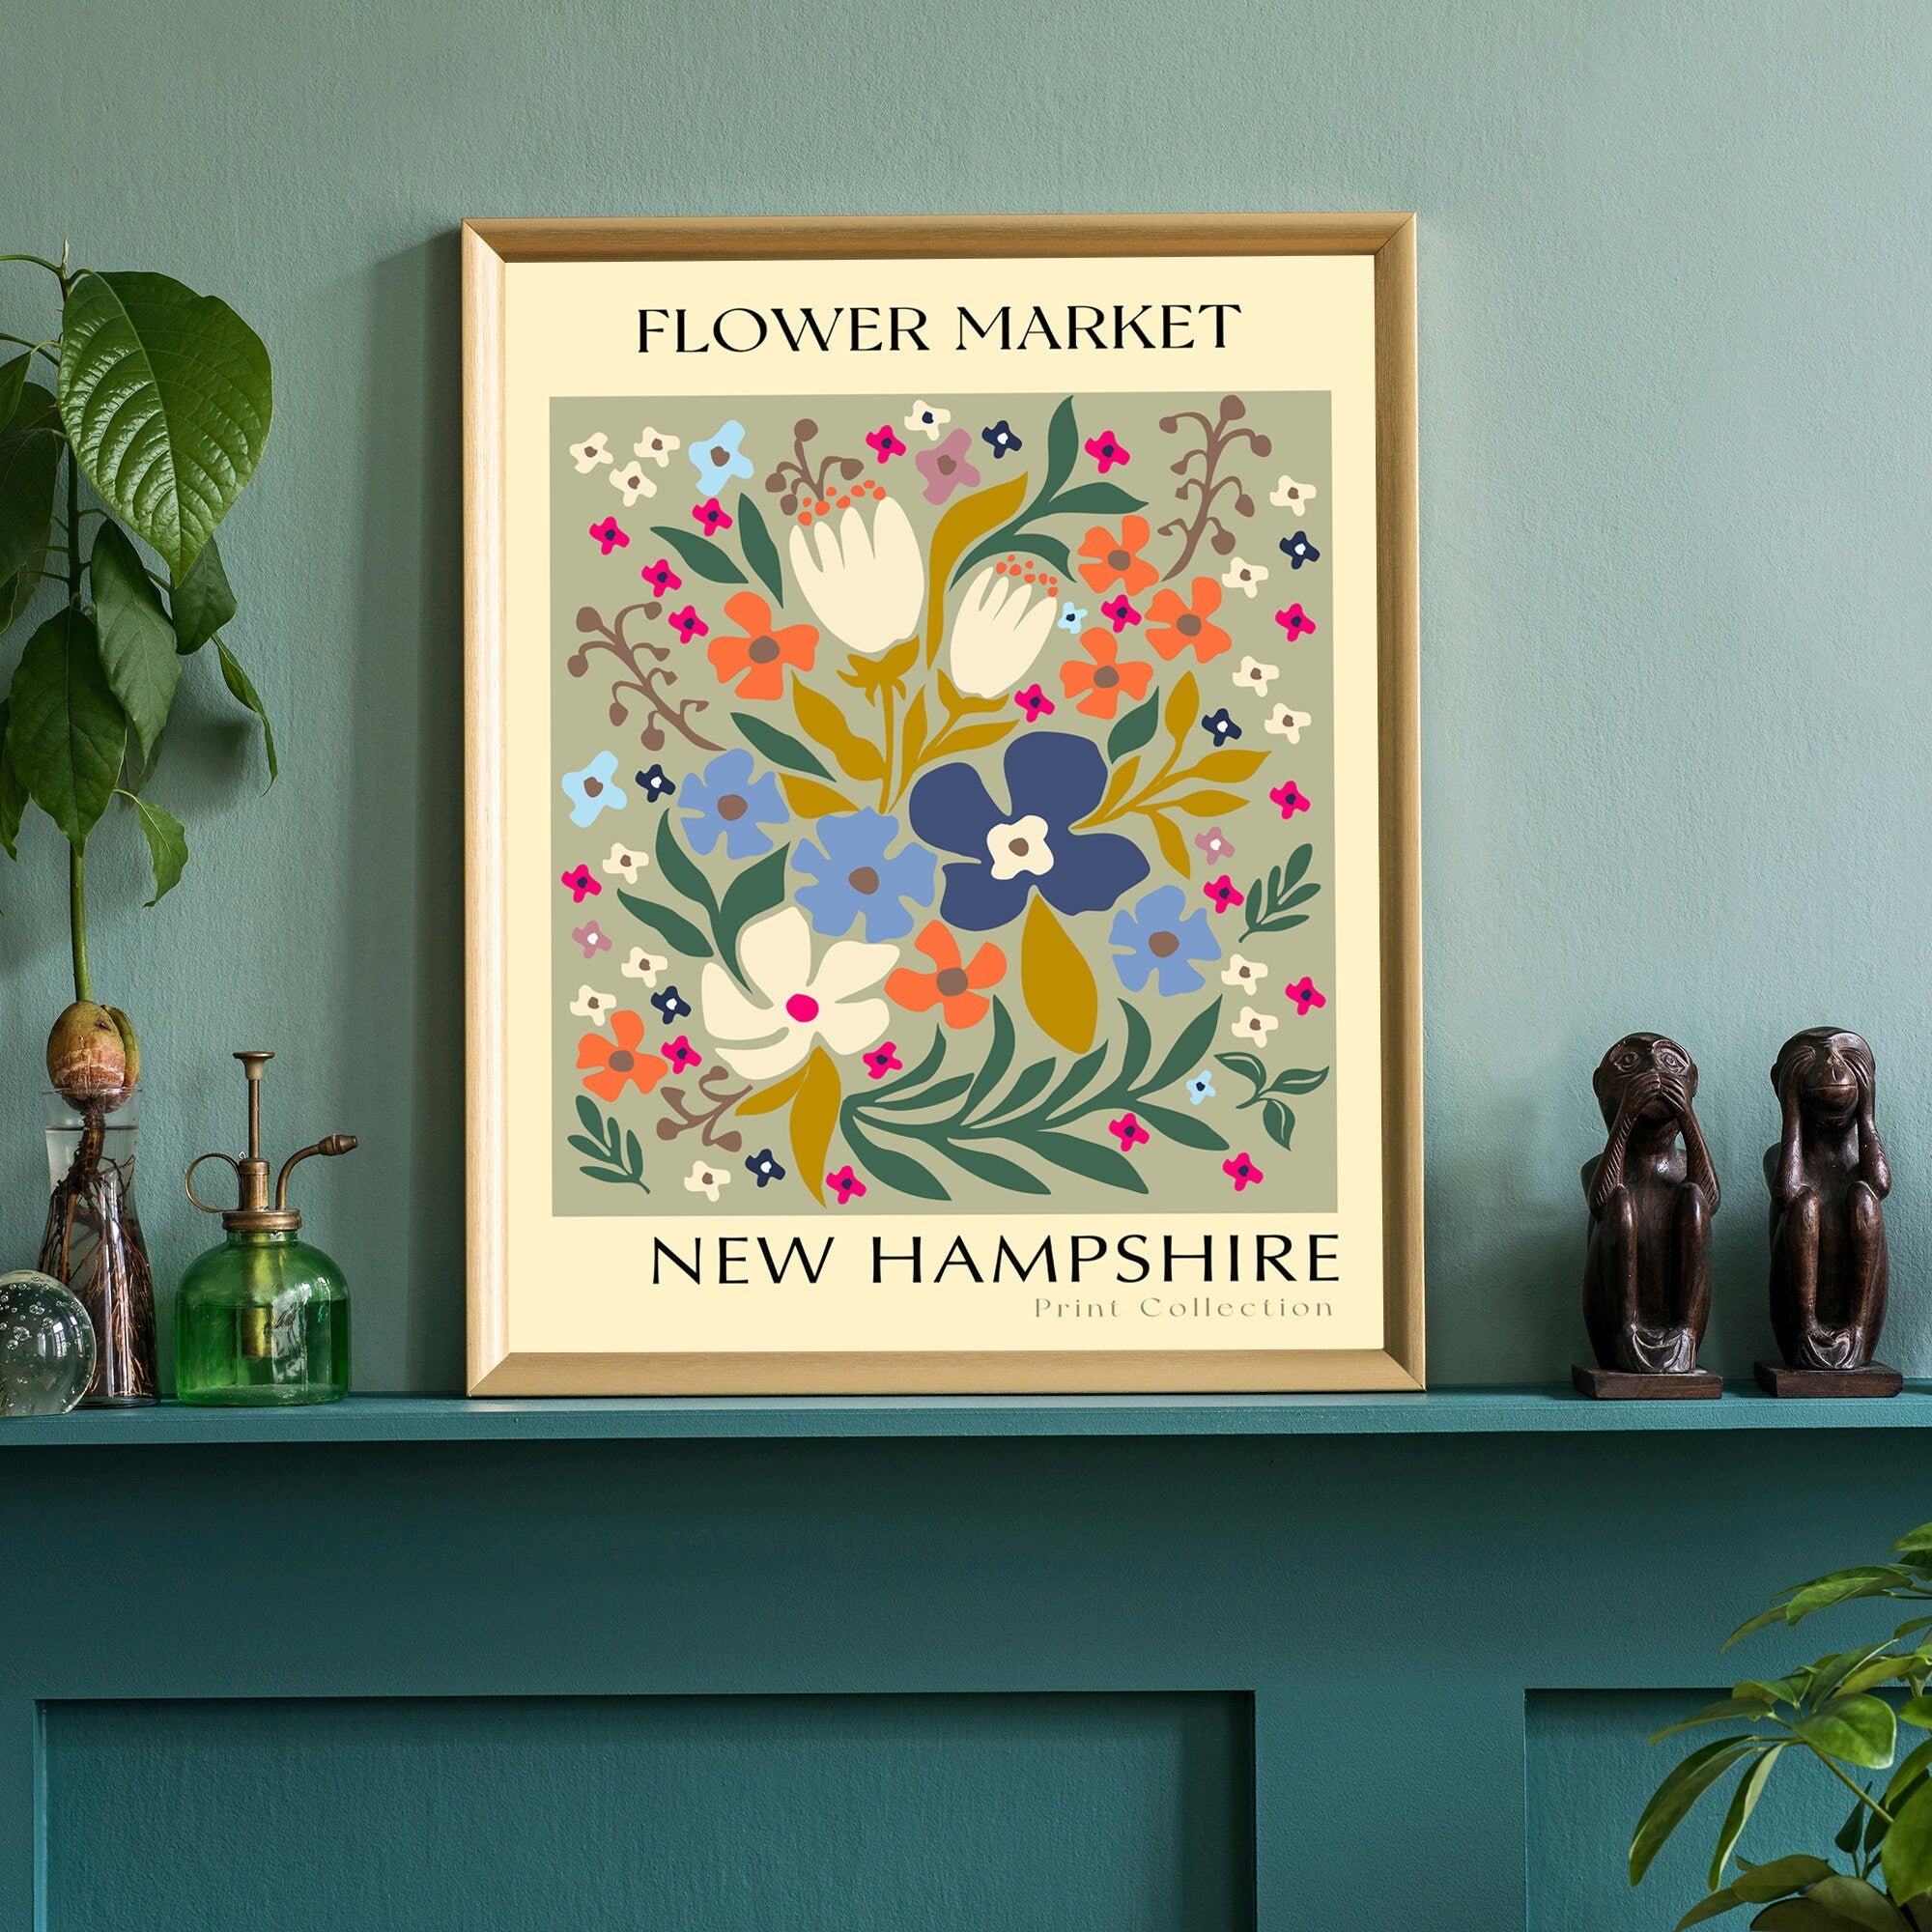 New Hampshire State flower print, USA states poster, New Hampshire flower market poster, Botanical posters, Nature poster, Floral wall art